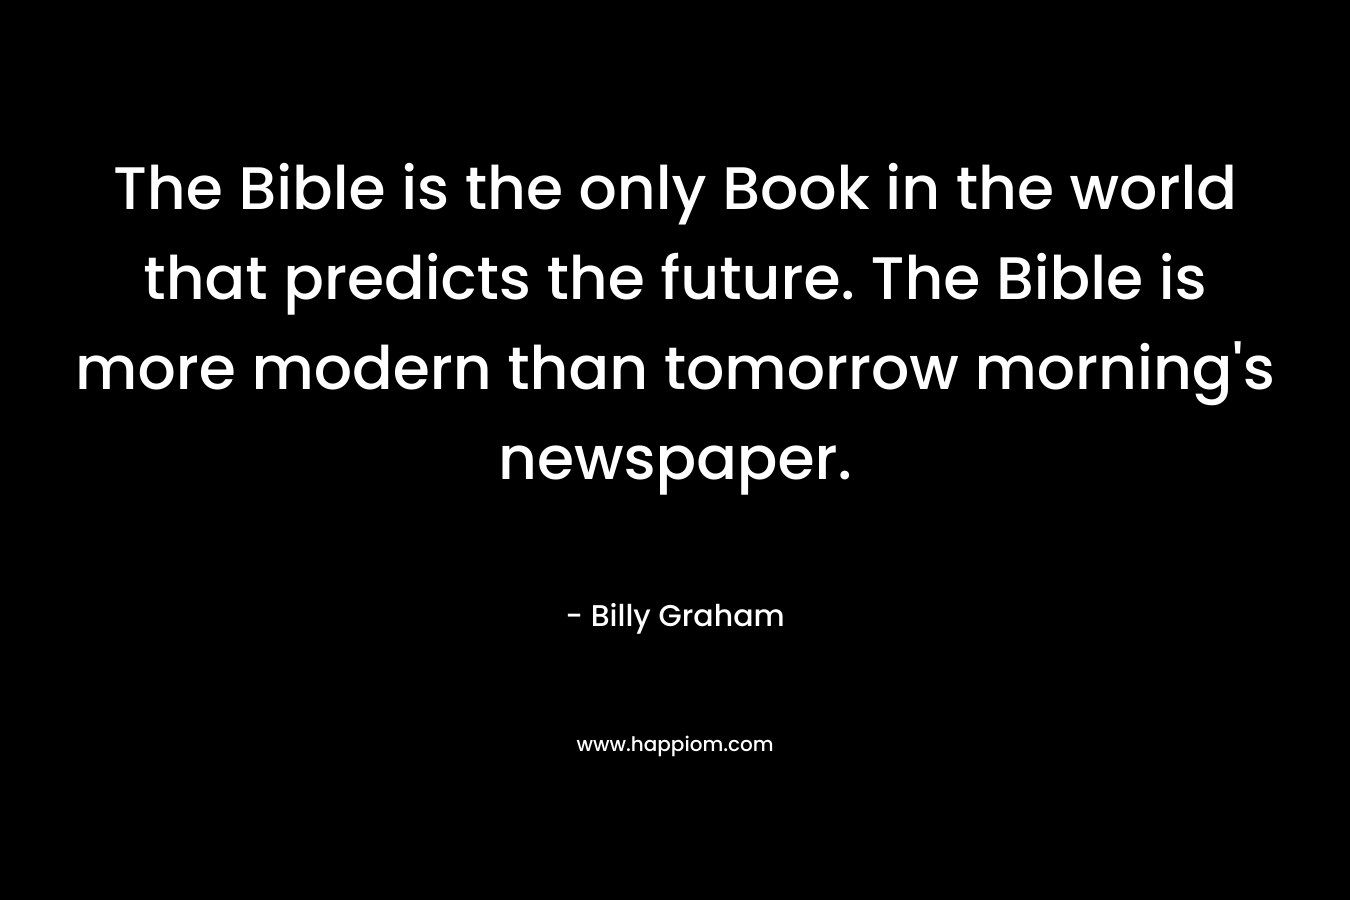 The Bible is the only Book in the world that predicts the future. The Bible is more modern than tomorrow morning's newspaper.